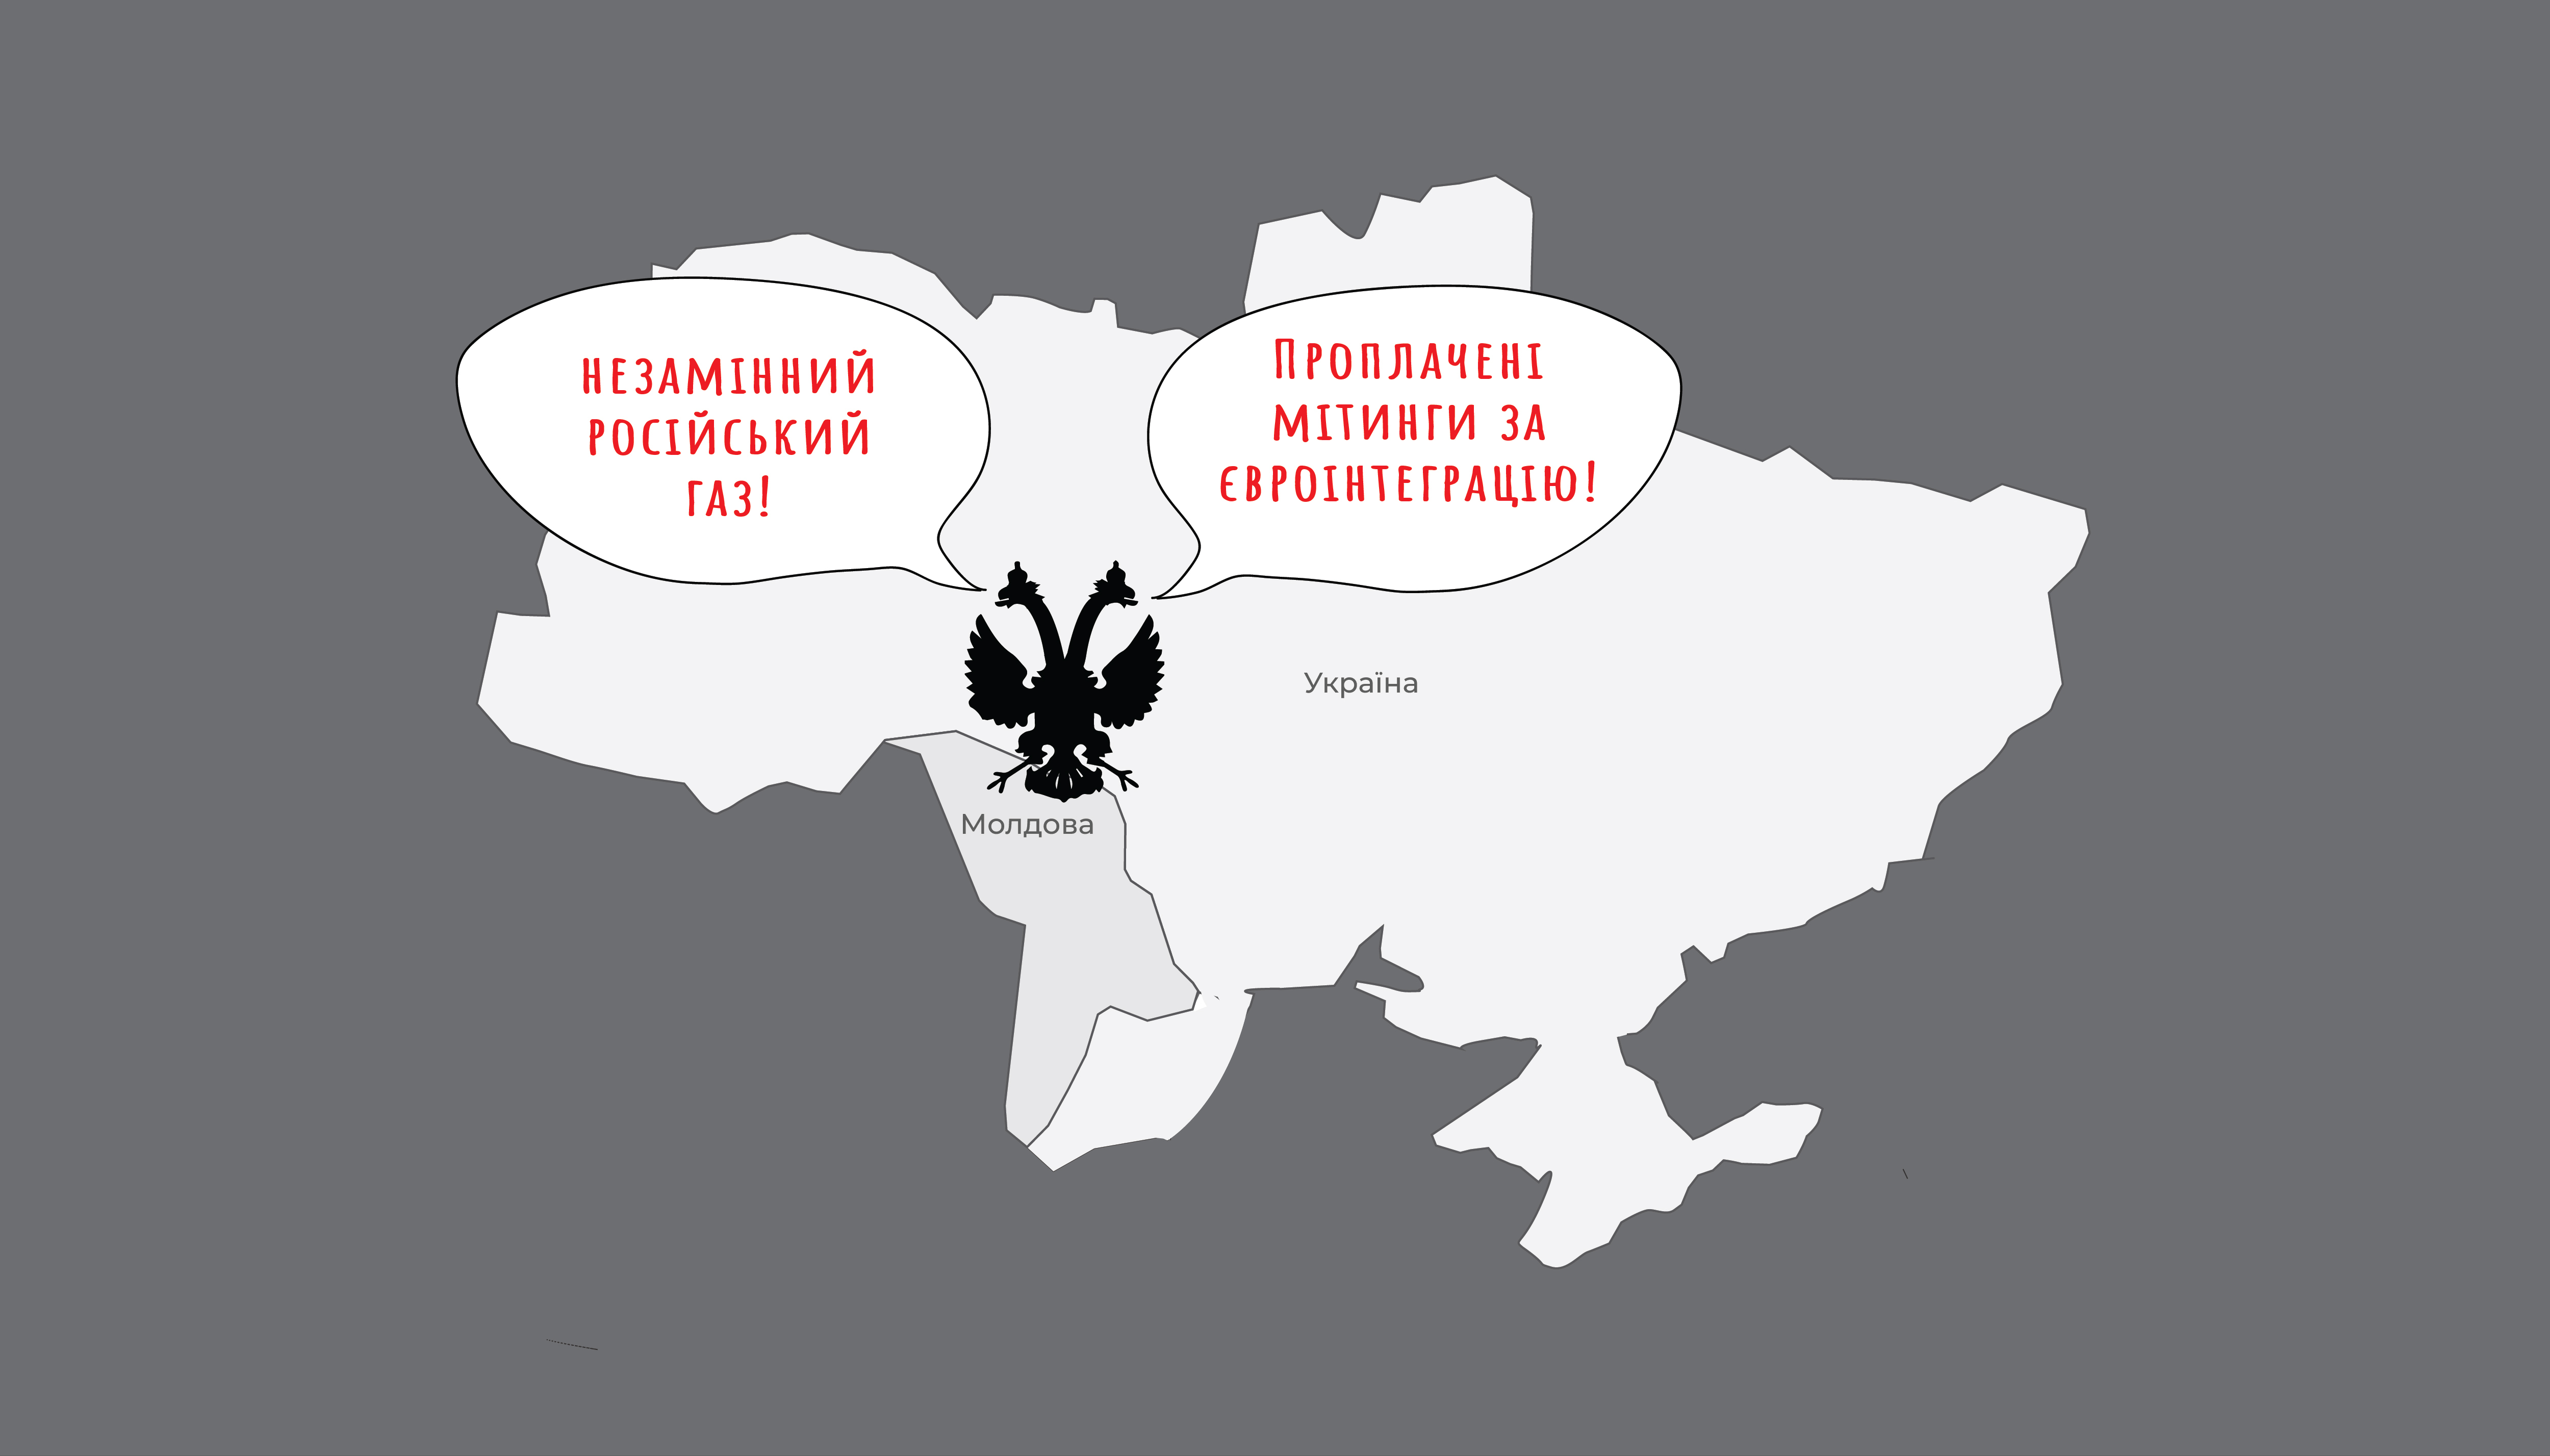 Image: One manual, two countries: commonalities of Russian agitational propaganda in the narratives spread in Moldova and Ukraine